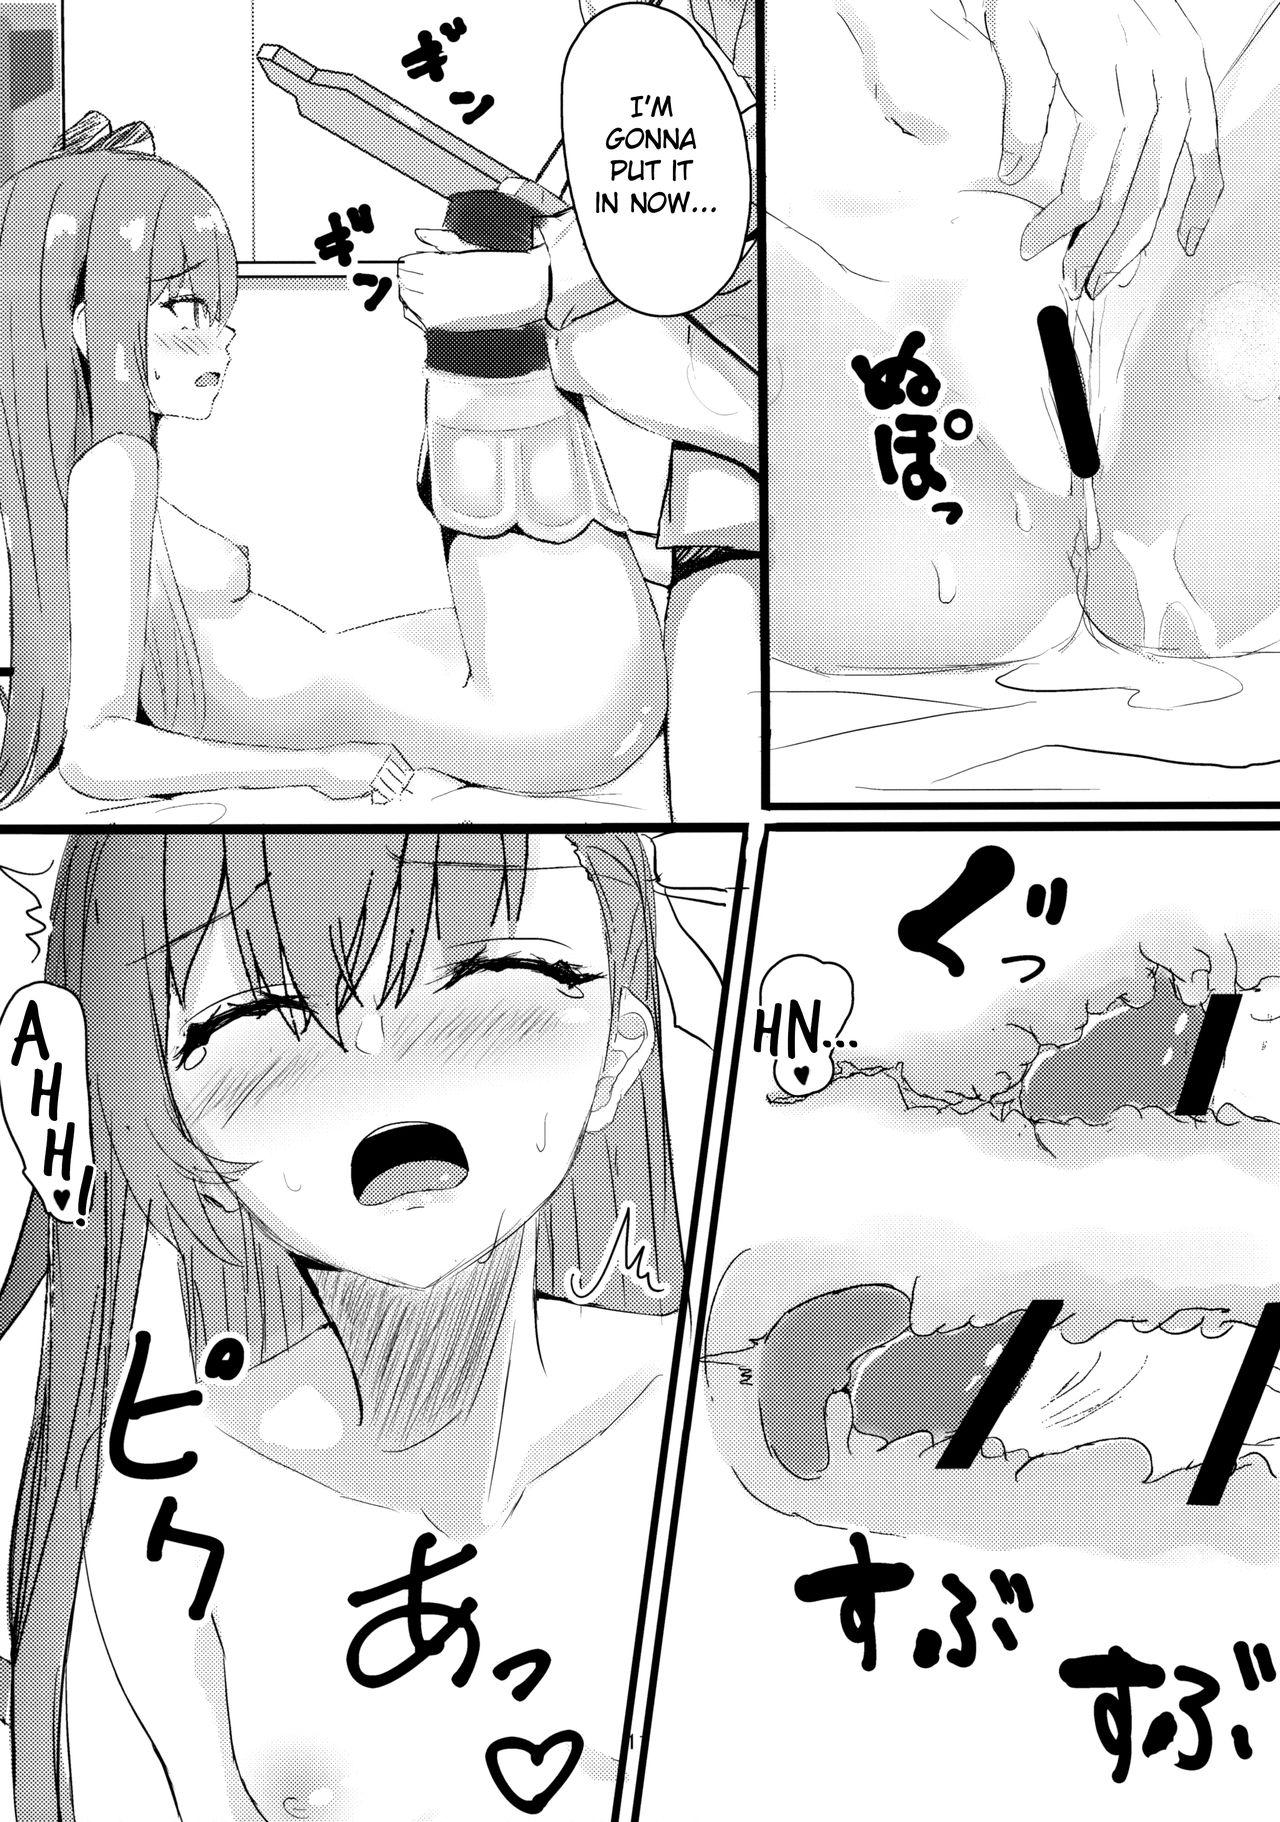 Suckingdick Melt down - Fate grand order Gay Blowjob - Page 10